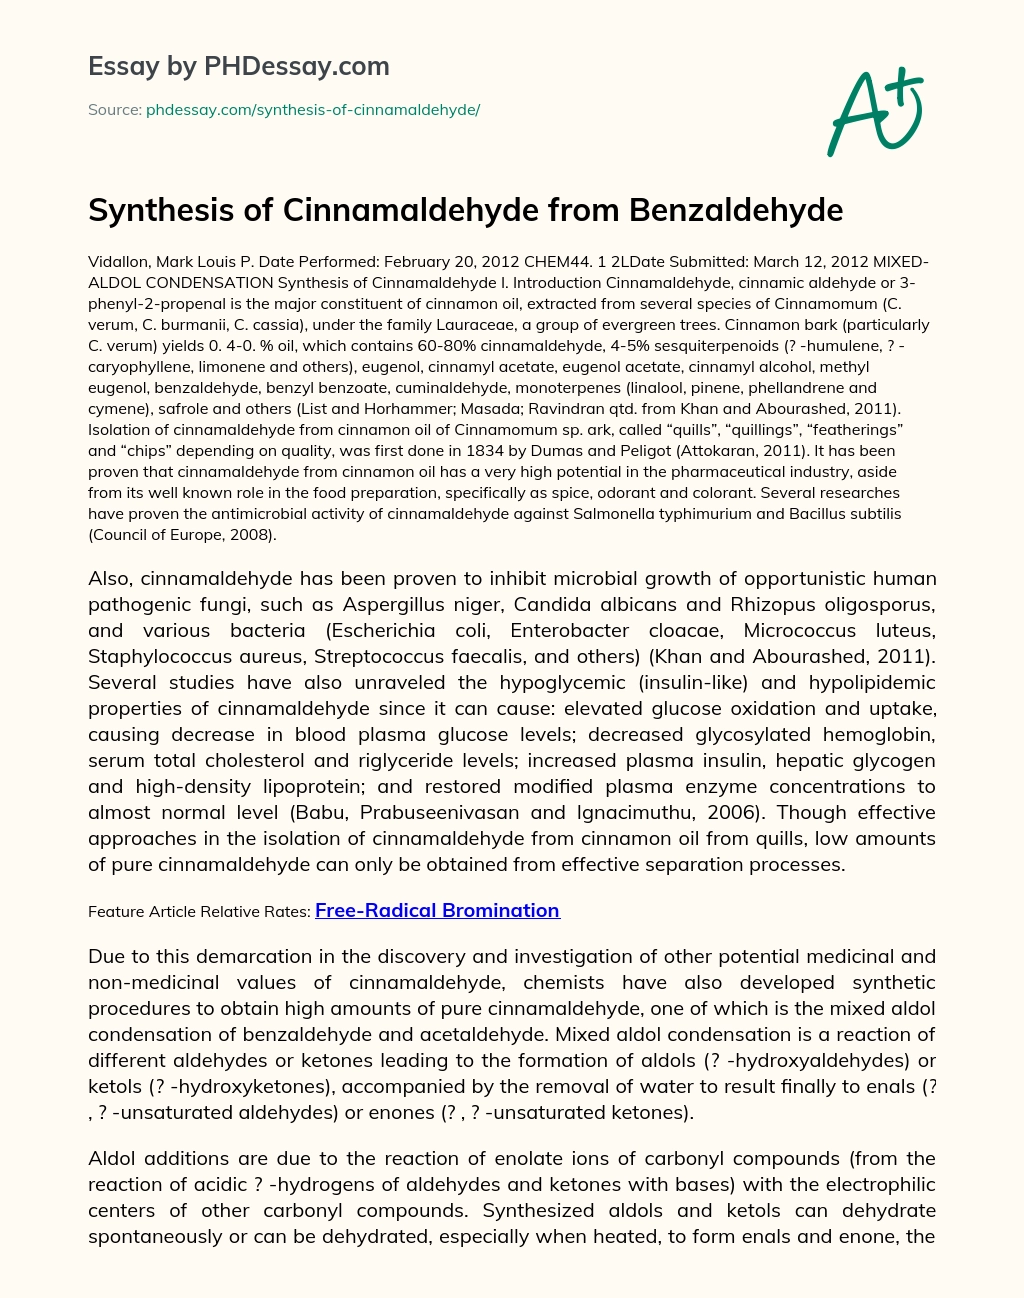 Synthesis of Cinnamaldehyde from Benzaldehyde essay